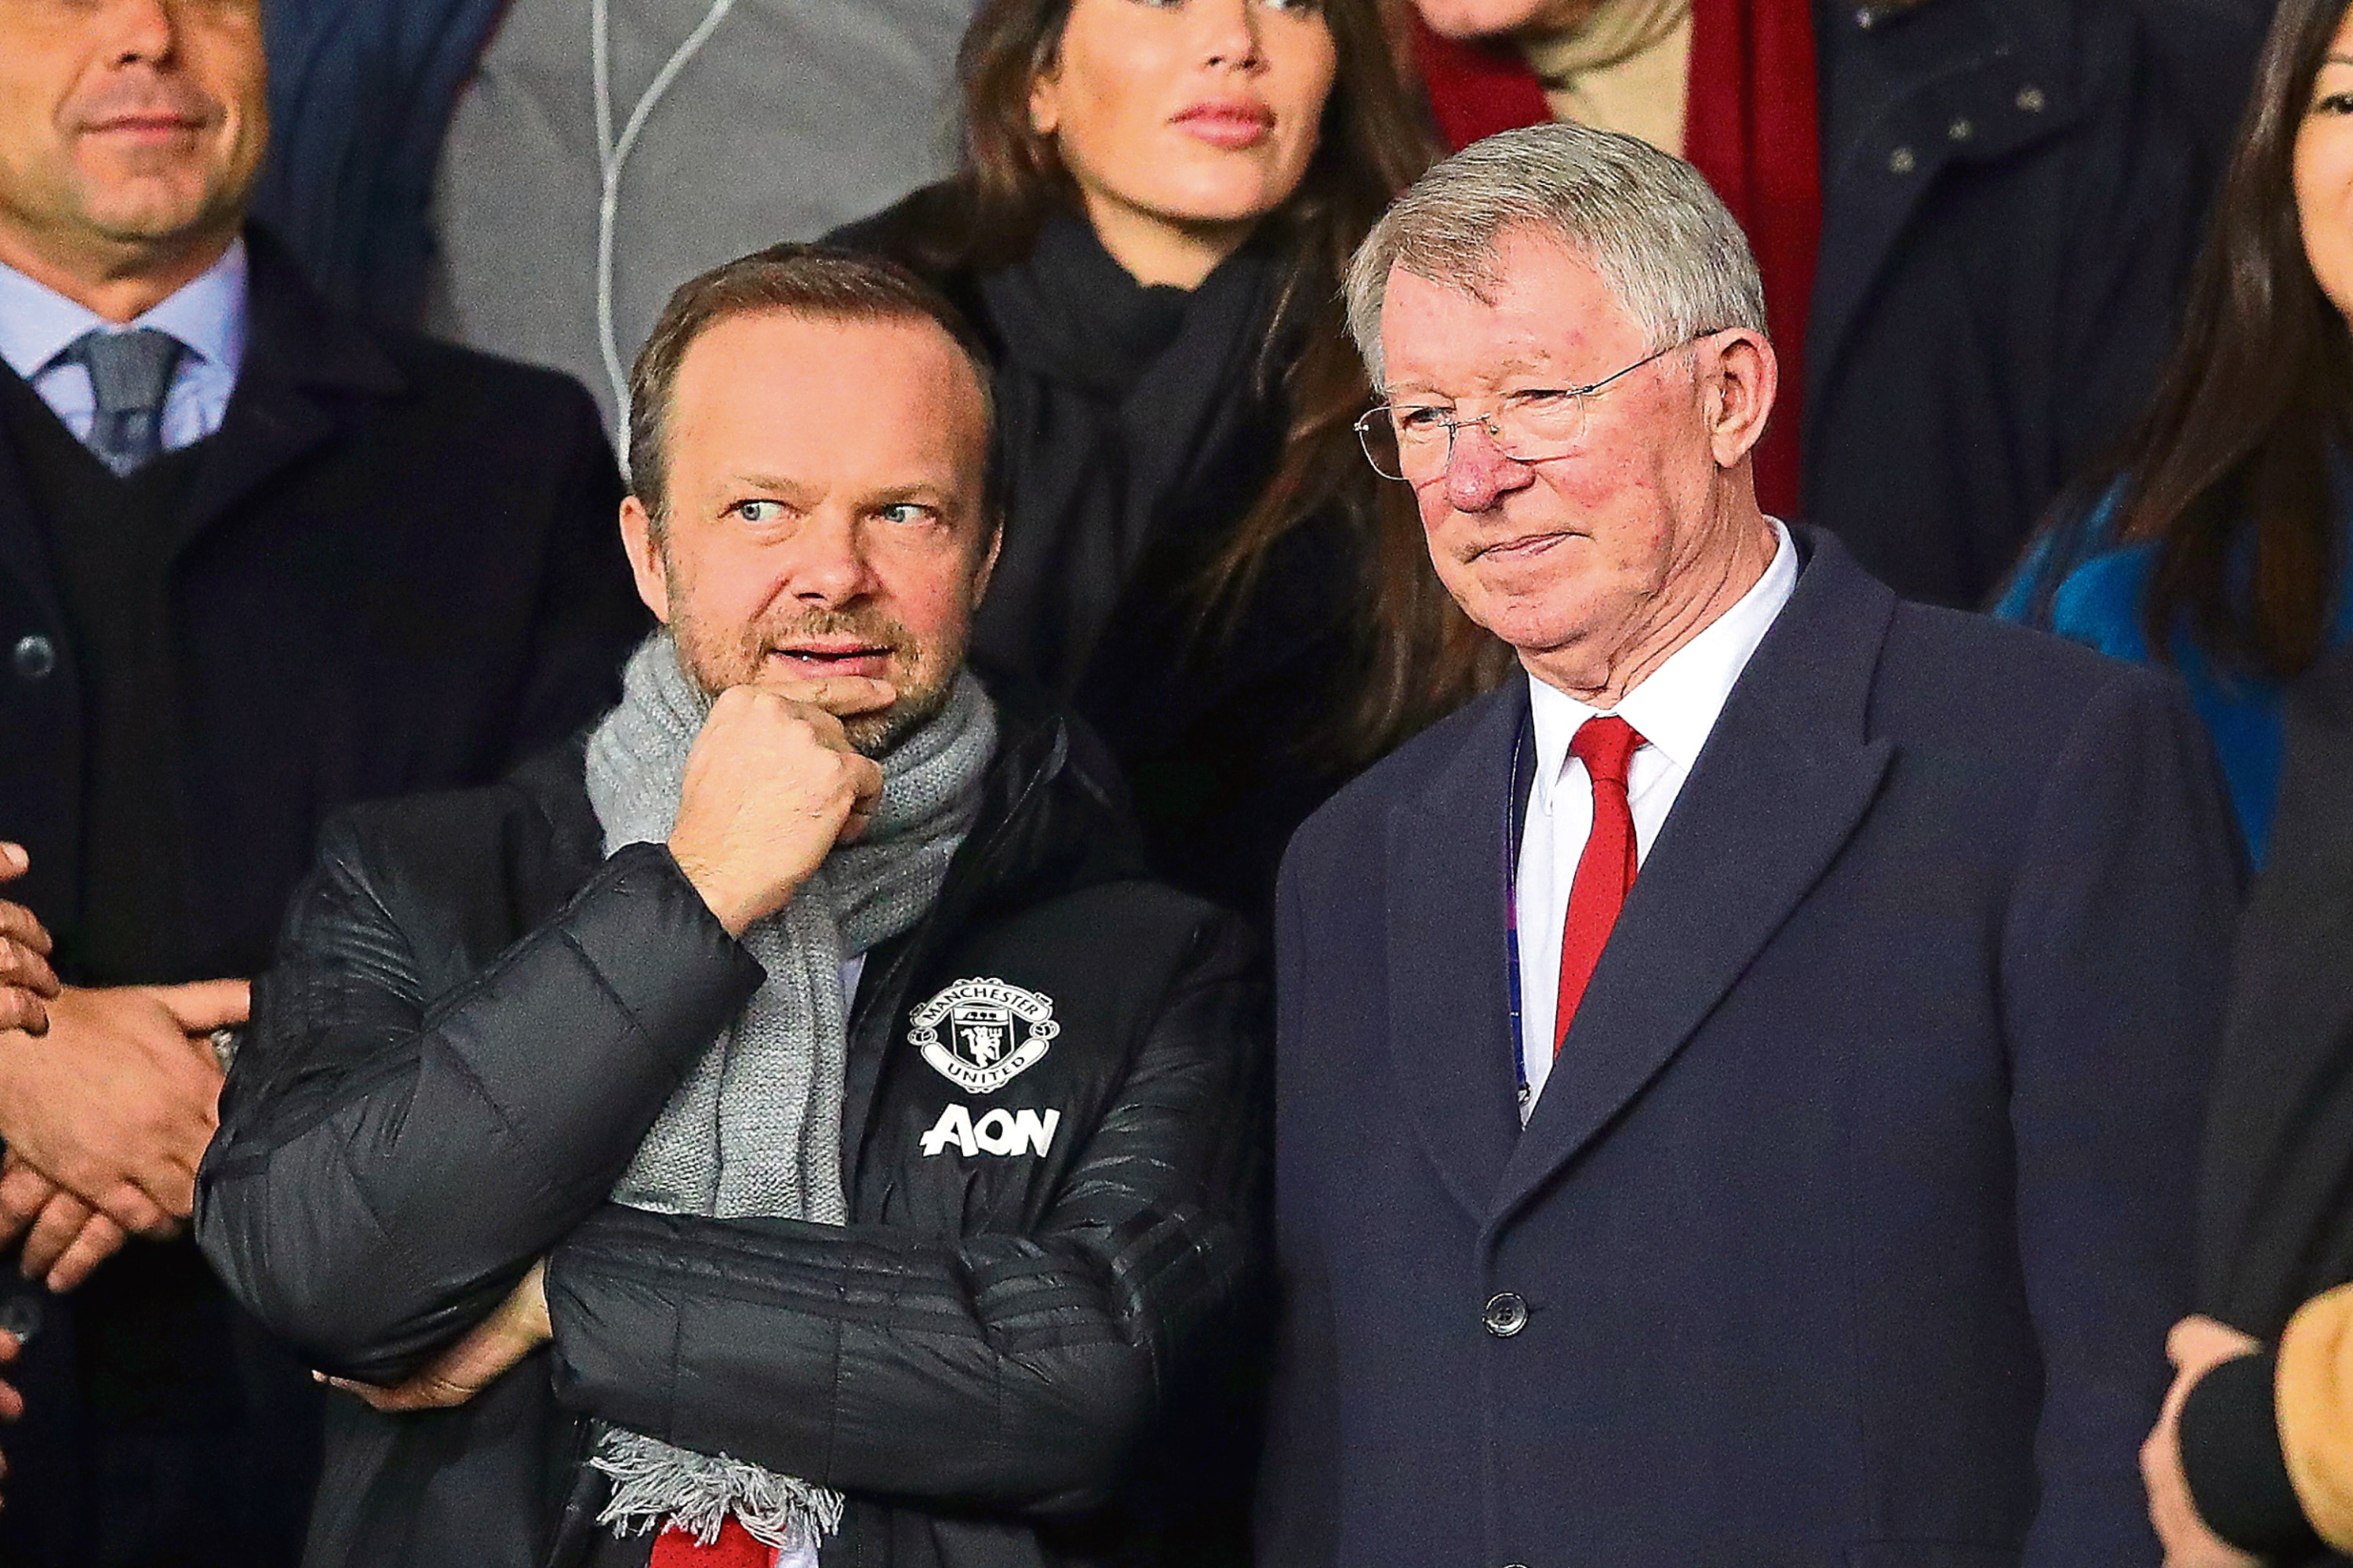 Sir Alex Ferguson next to Manchester United chief-executive Ed Woodward ahead of the UEFA Champions League Round of 16 Second Leg match between Paris Saint-Germain and Manchester United at Parc des Princes on March 06, 2019 in Paris, France.